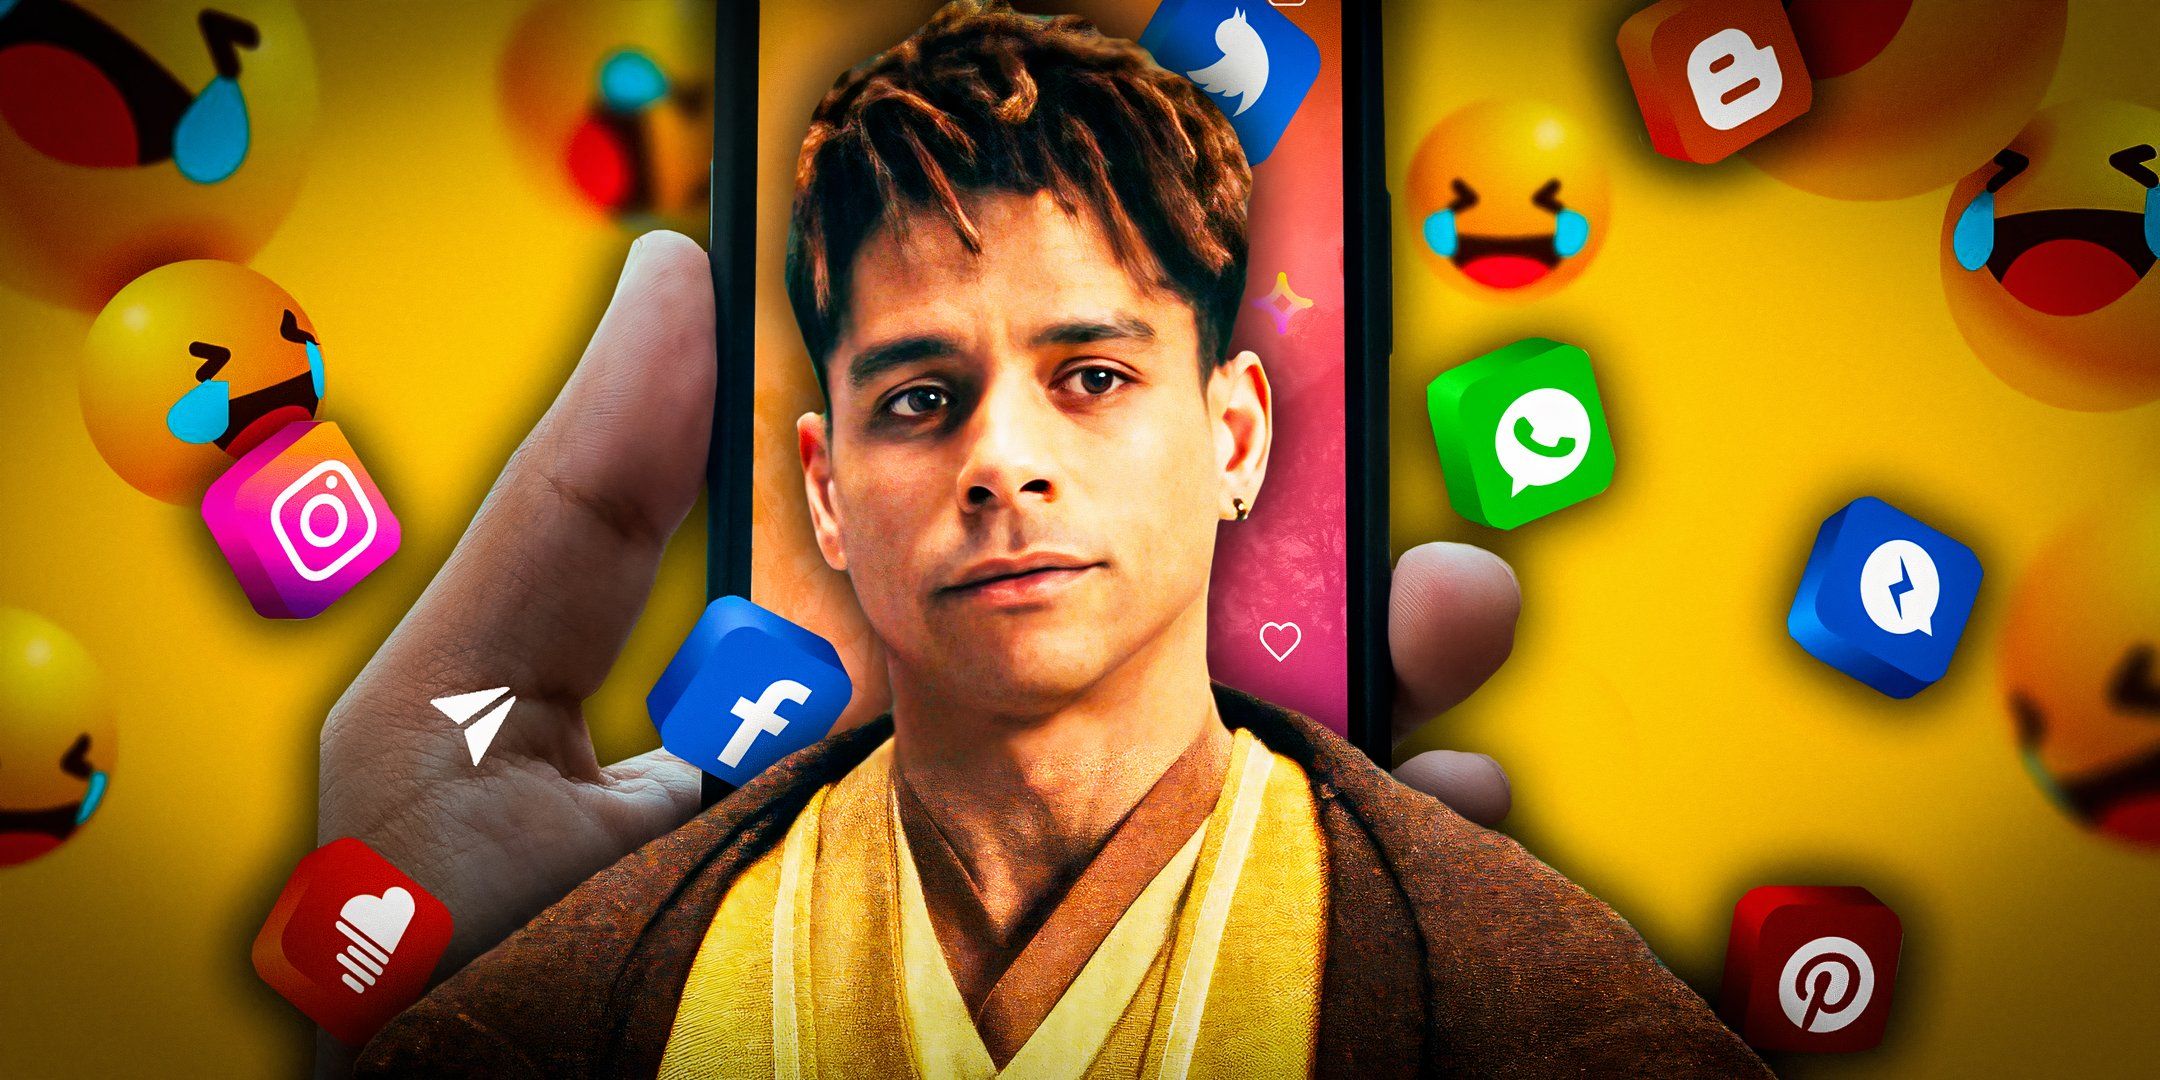 Charlie Barnett as Yord Fandar, edited with a hand holding a phone, laughing emoticons, and social media symbols